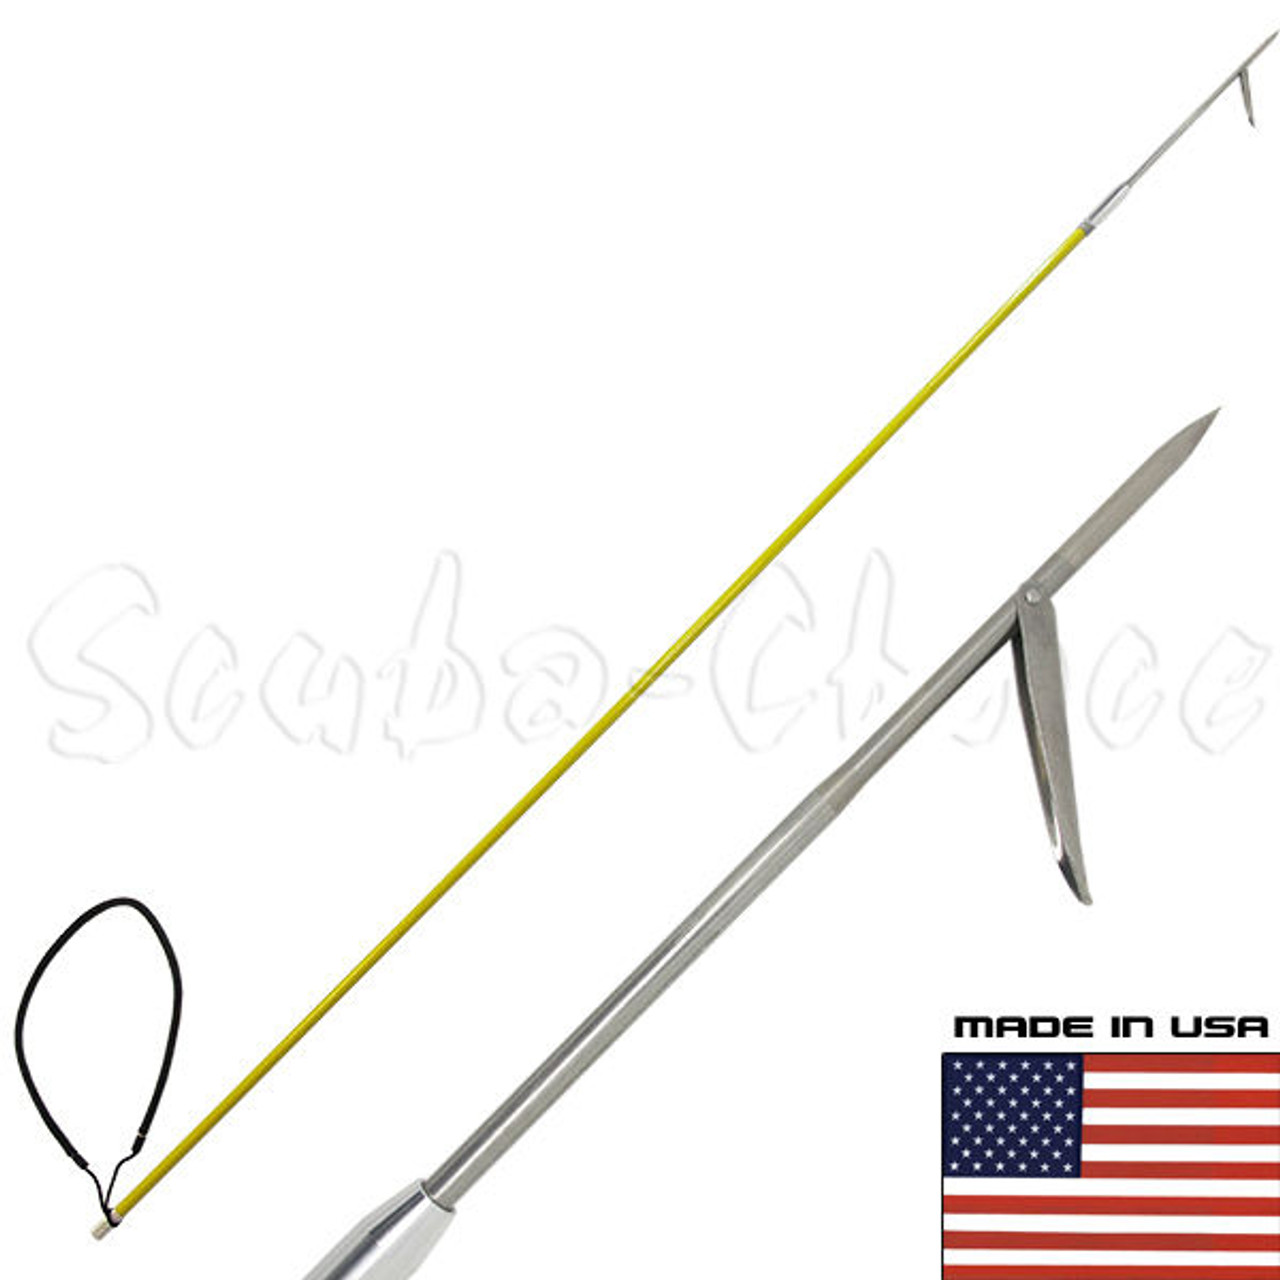 6' One Piece Spearfishing Fiber Glass Pole Spear w/ 1 Prong Single Barb Tip  - scubachoice